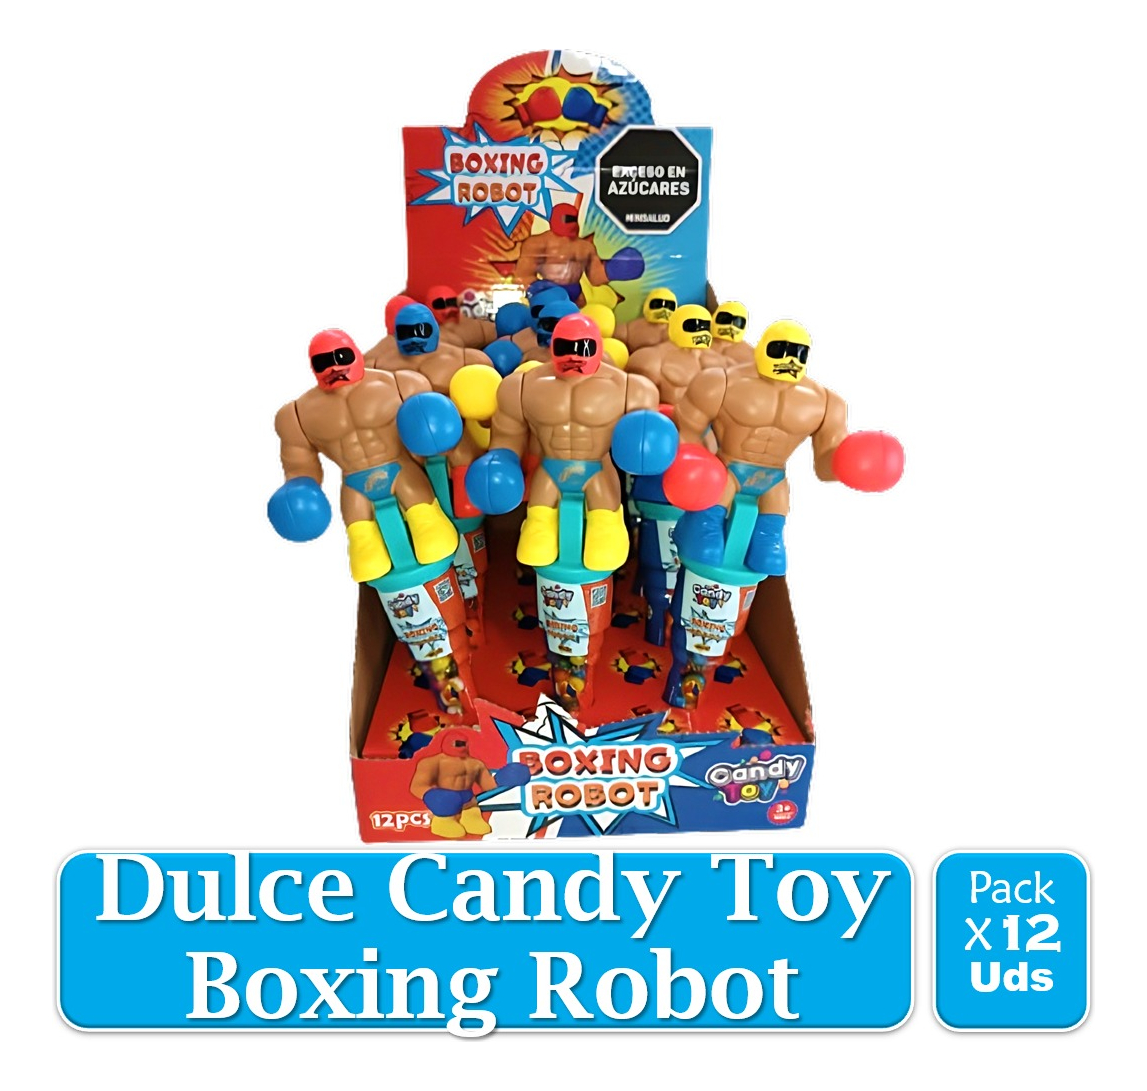 Dulces Juguetes Candy Toy Boxing Robot X 12 uds